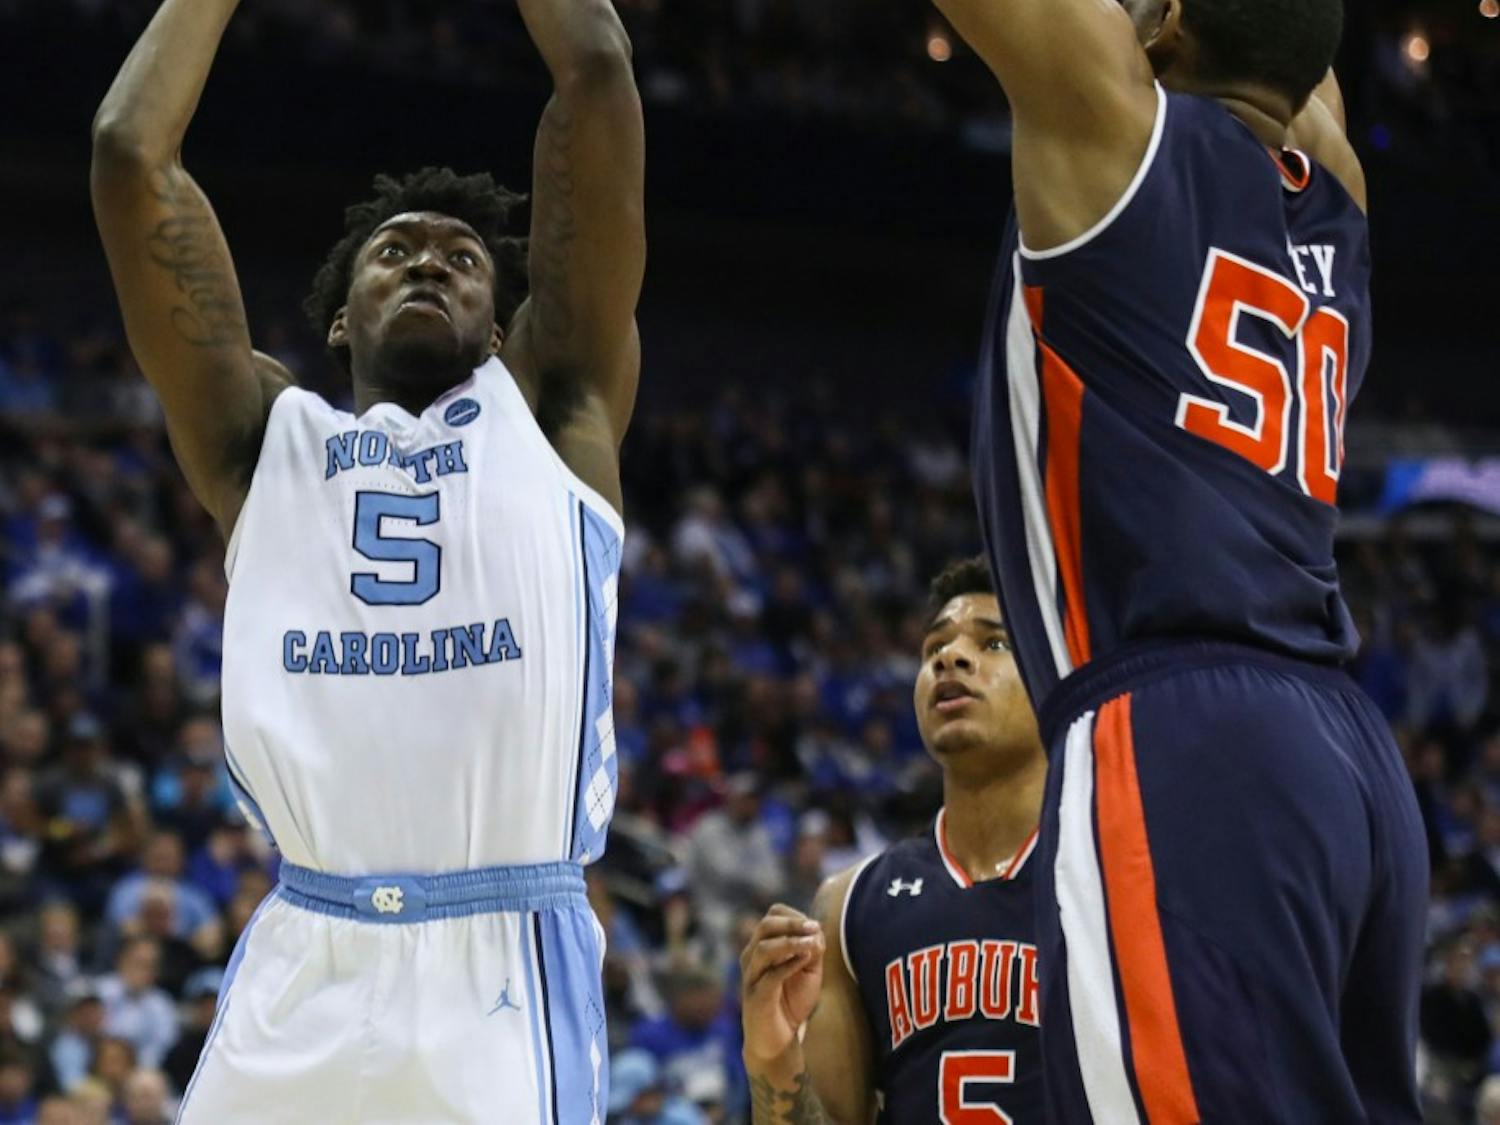 Auburn junior center Austin Wiley (50) guards guards UNC first-year forward Nassir Little (5) during UNC's 97-80 loss against Auburn in the Sweet 16 of the NCAA Tournament on Friday, March 29, 2019 at the Sprint Center in Kansas City, M.O.